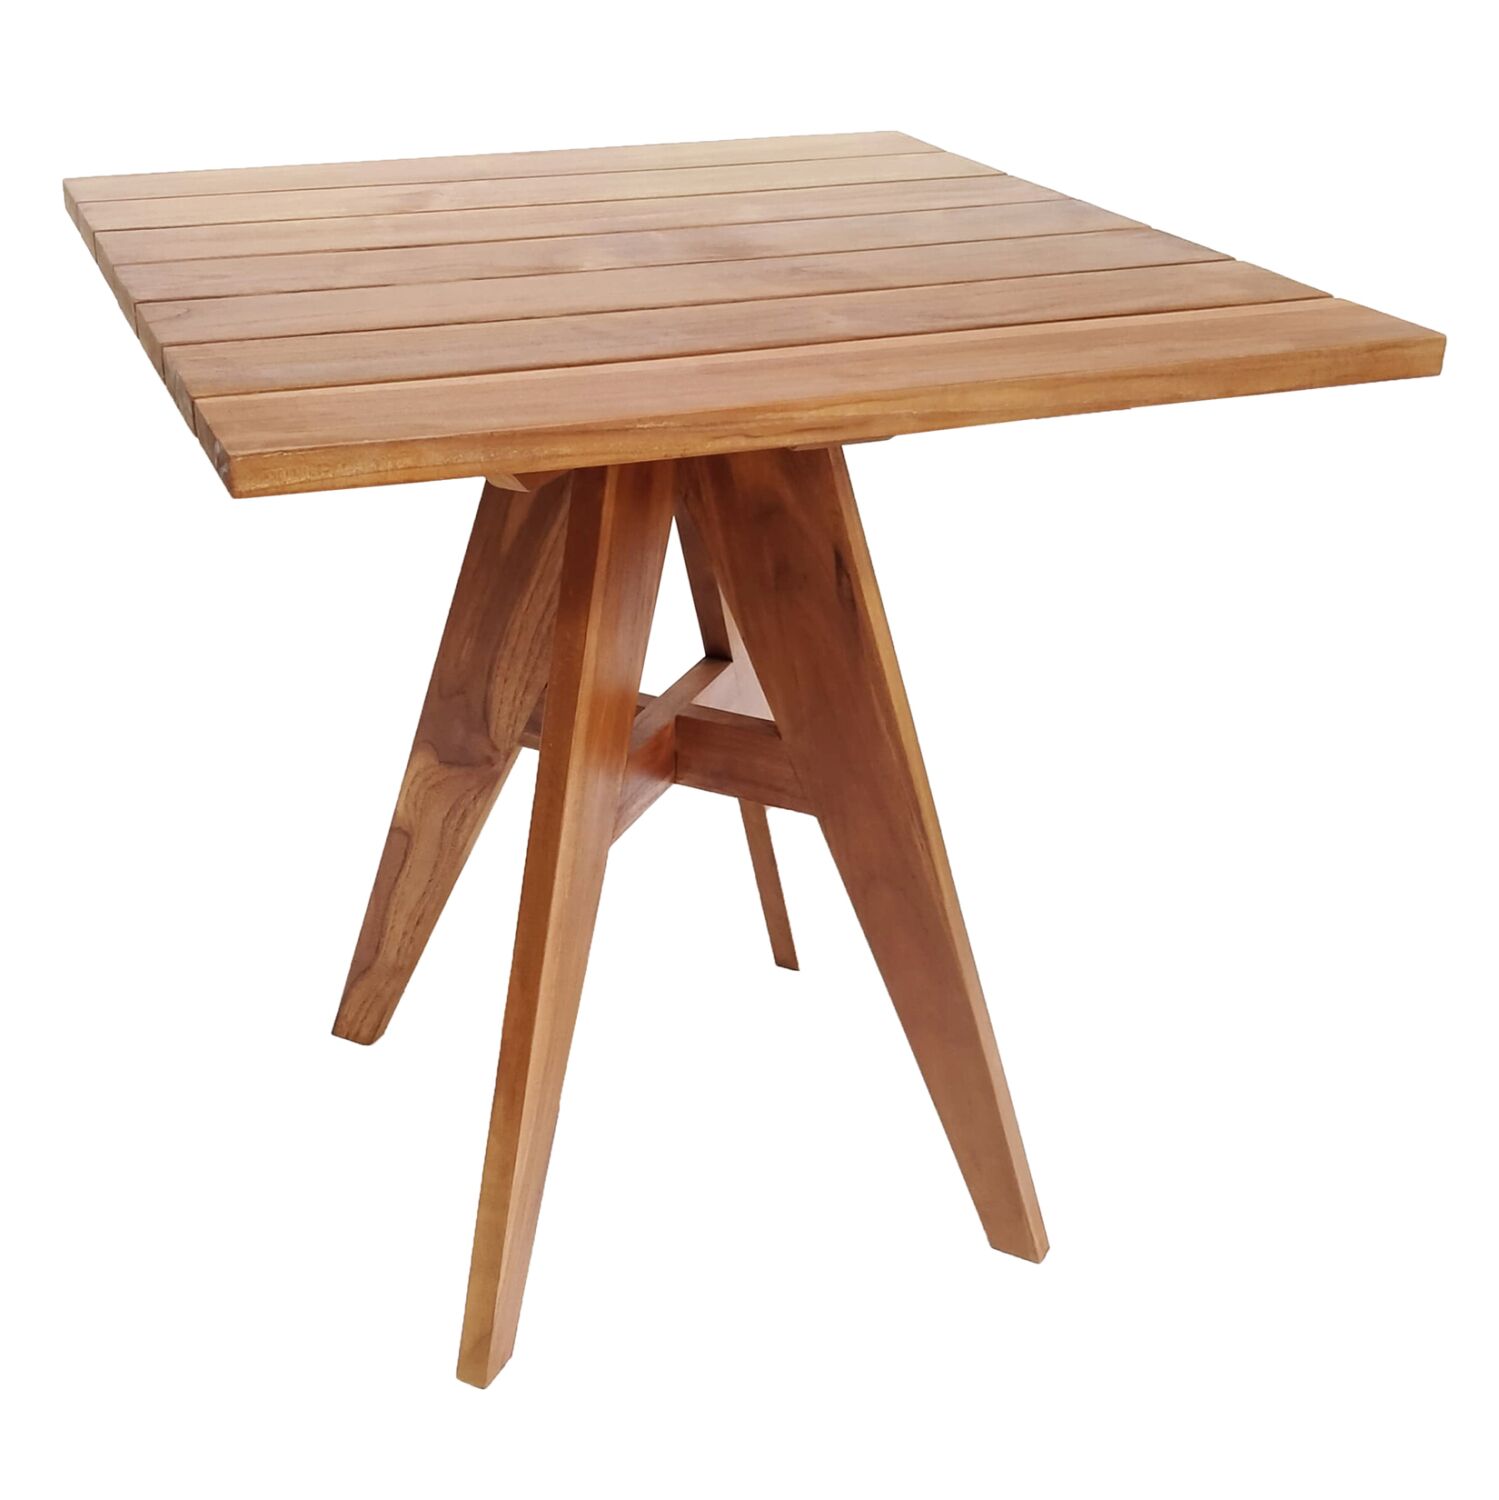 OUTDOOR SQUARE DINING TABLE LEO HM9918 TEAK WOOD 70x70x75Hcm.